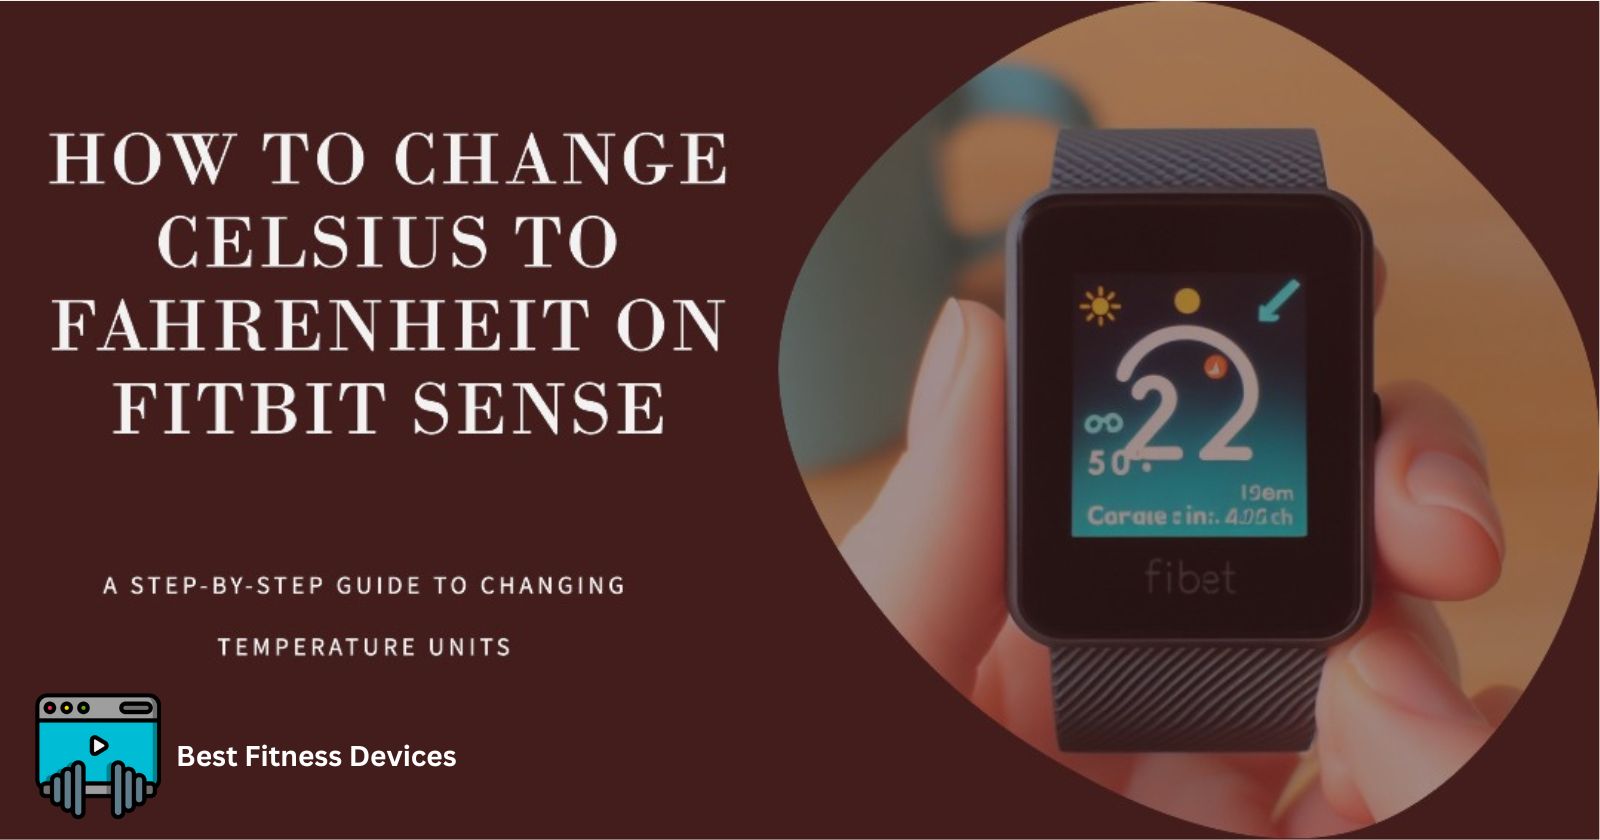 How to Change Celsius to Fahrenheit on Fitbit Sense